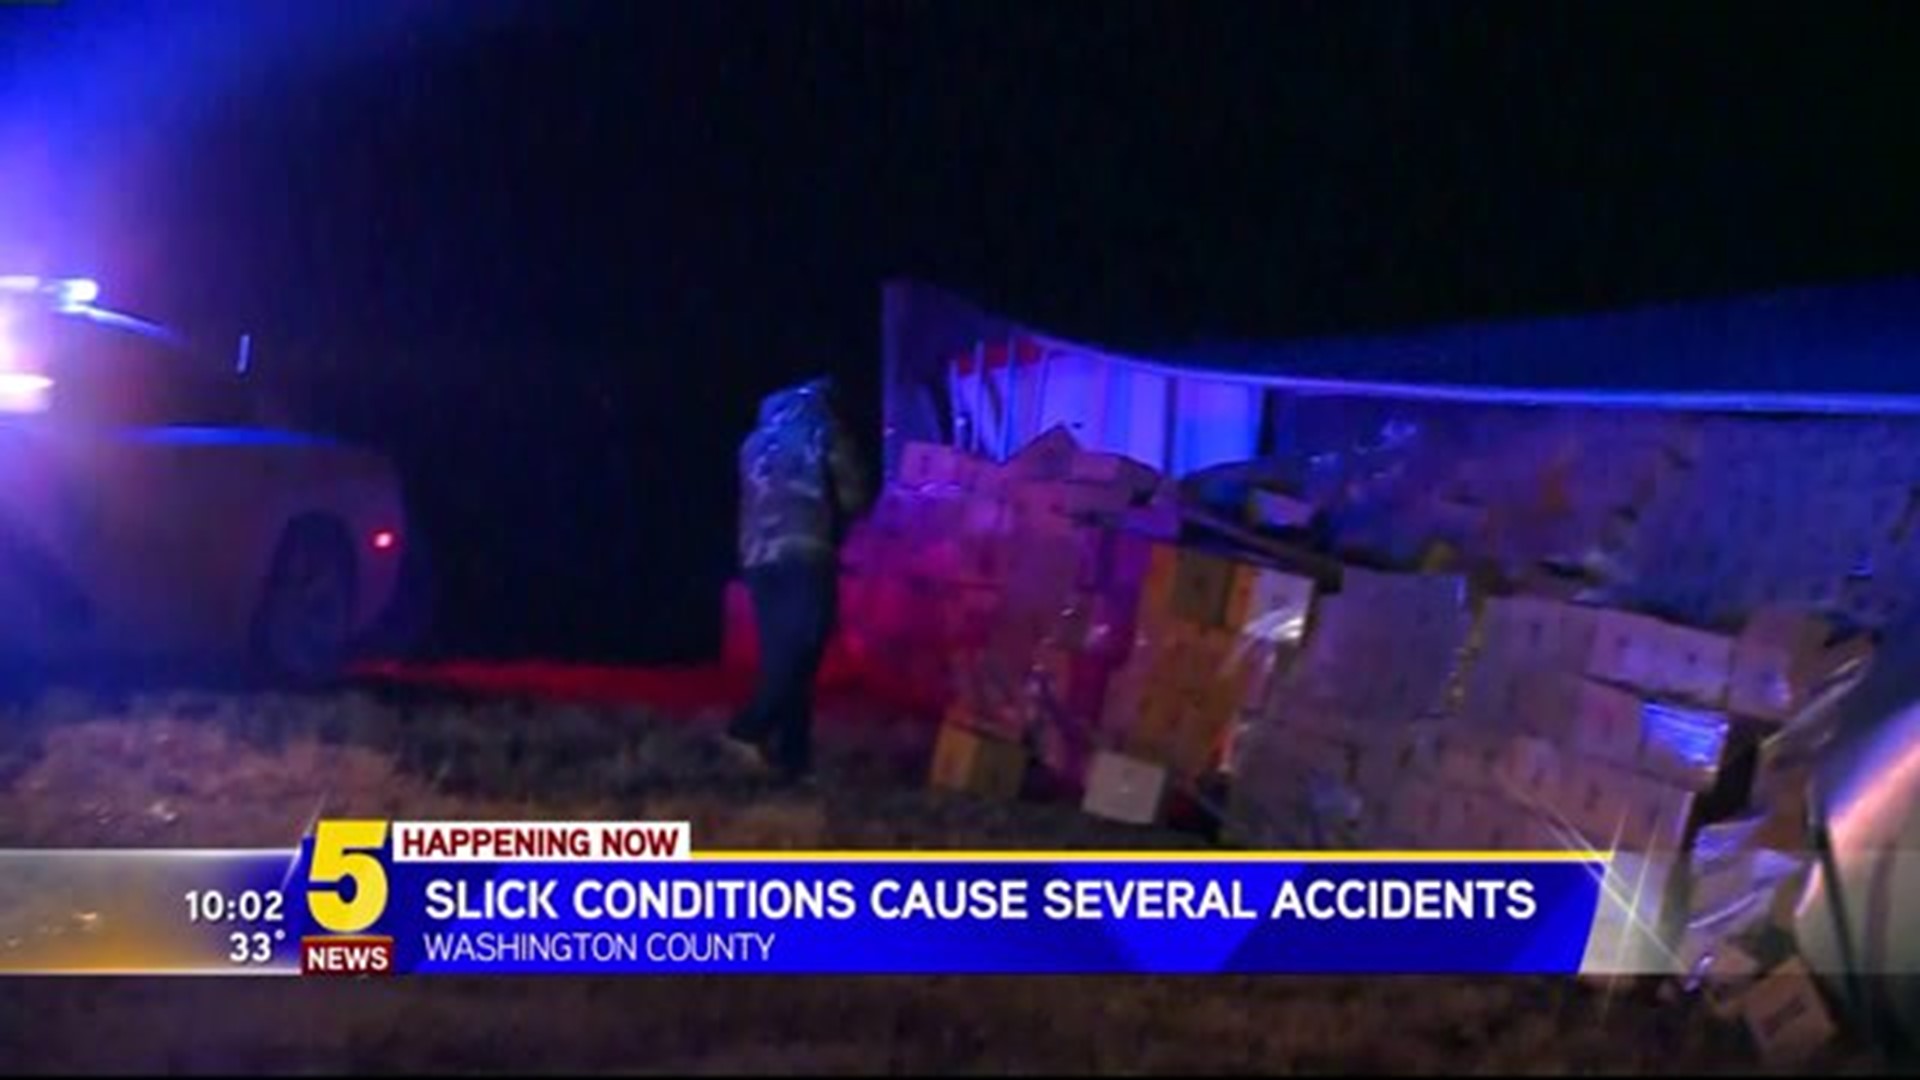 Slick Conditions Cause Several Accidents